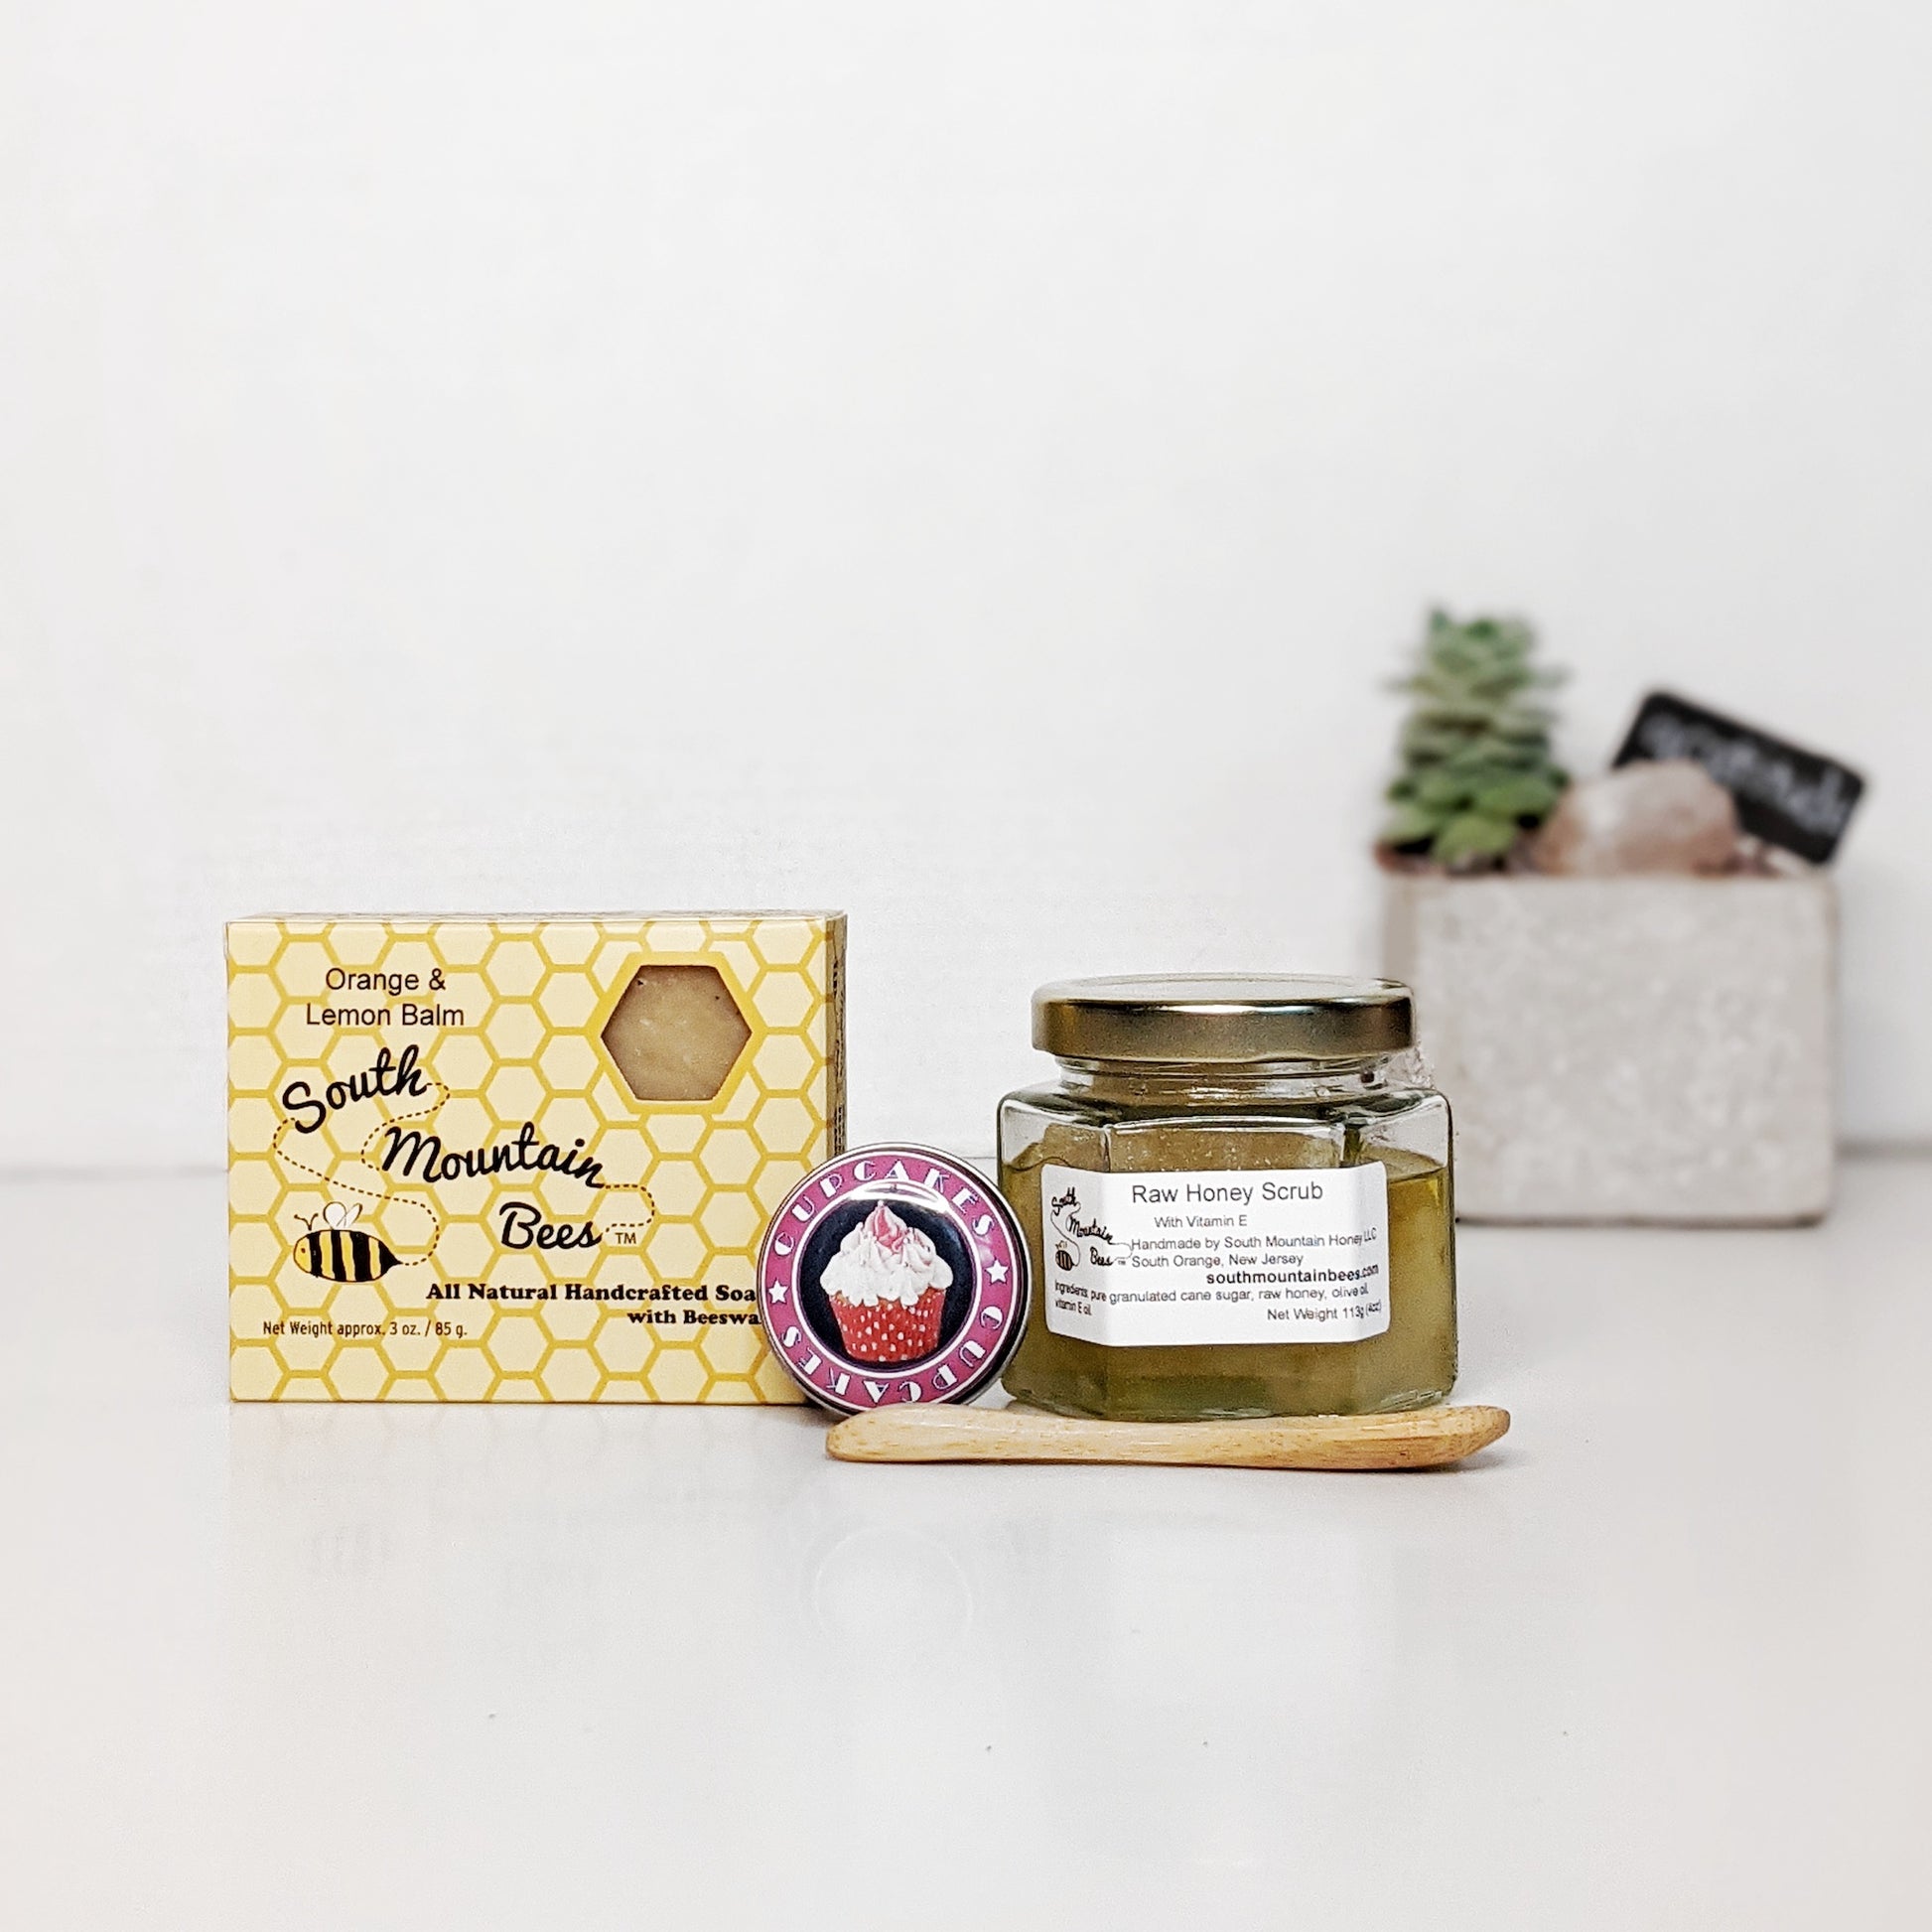 The Hero Teacher Gift is a pampering set with two award winning products: a handcrafted natural soap and a beeswax lip balm, together with our popular raw honey scrub with a free bamboo spoon.